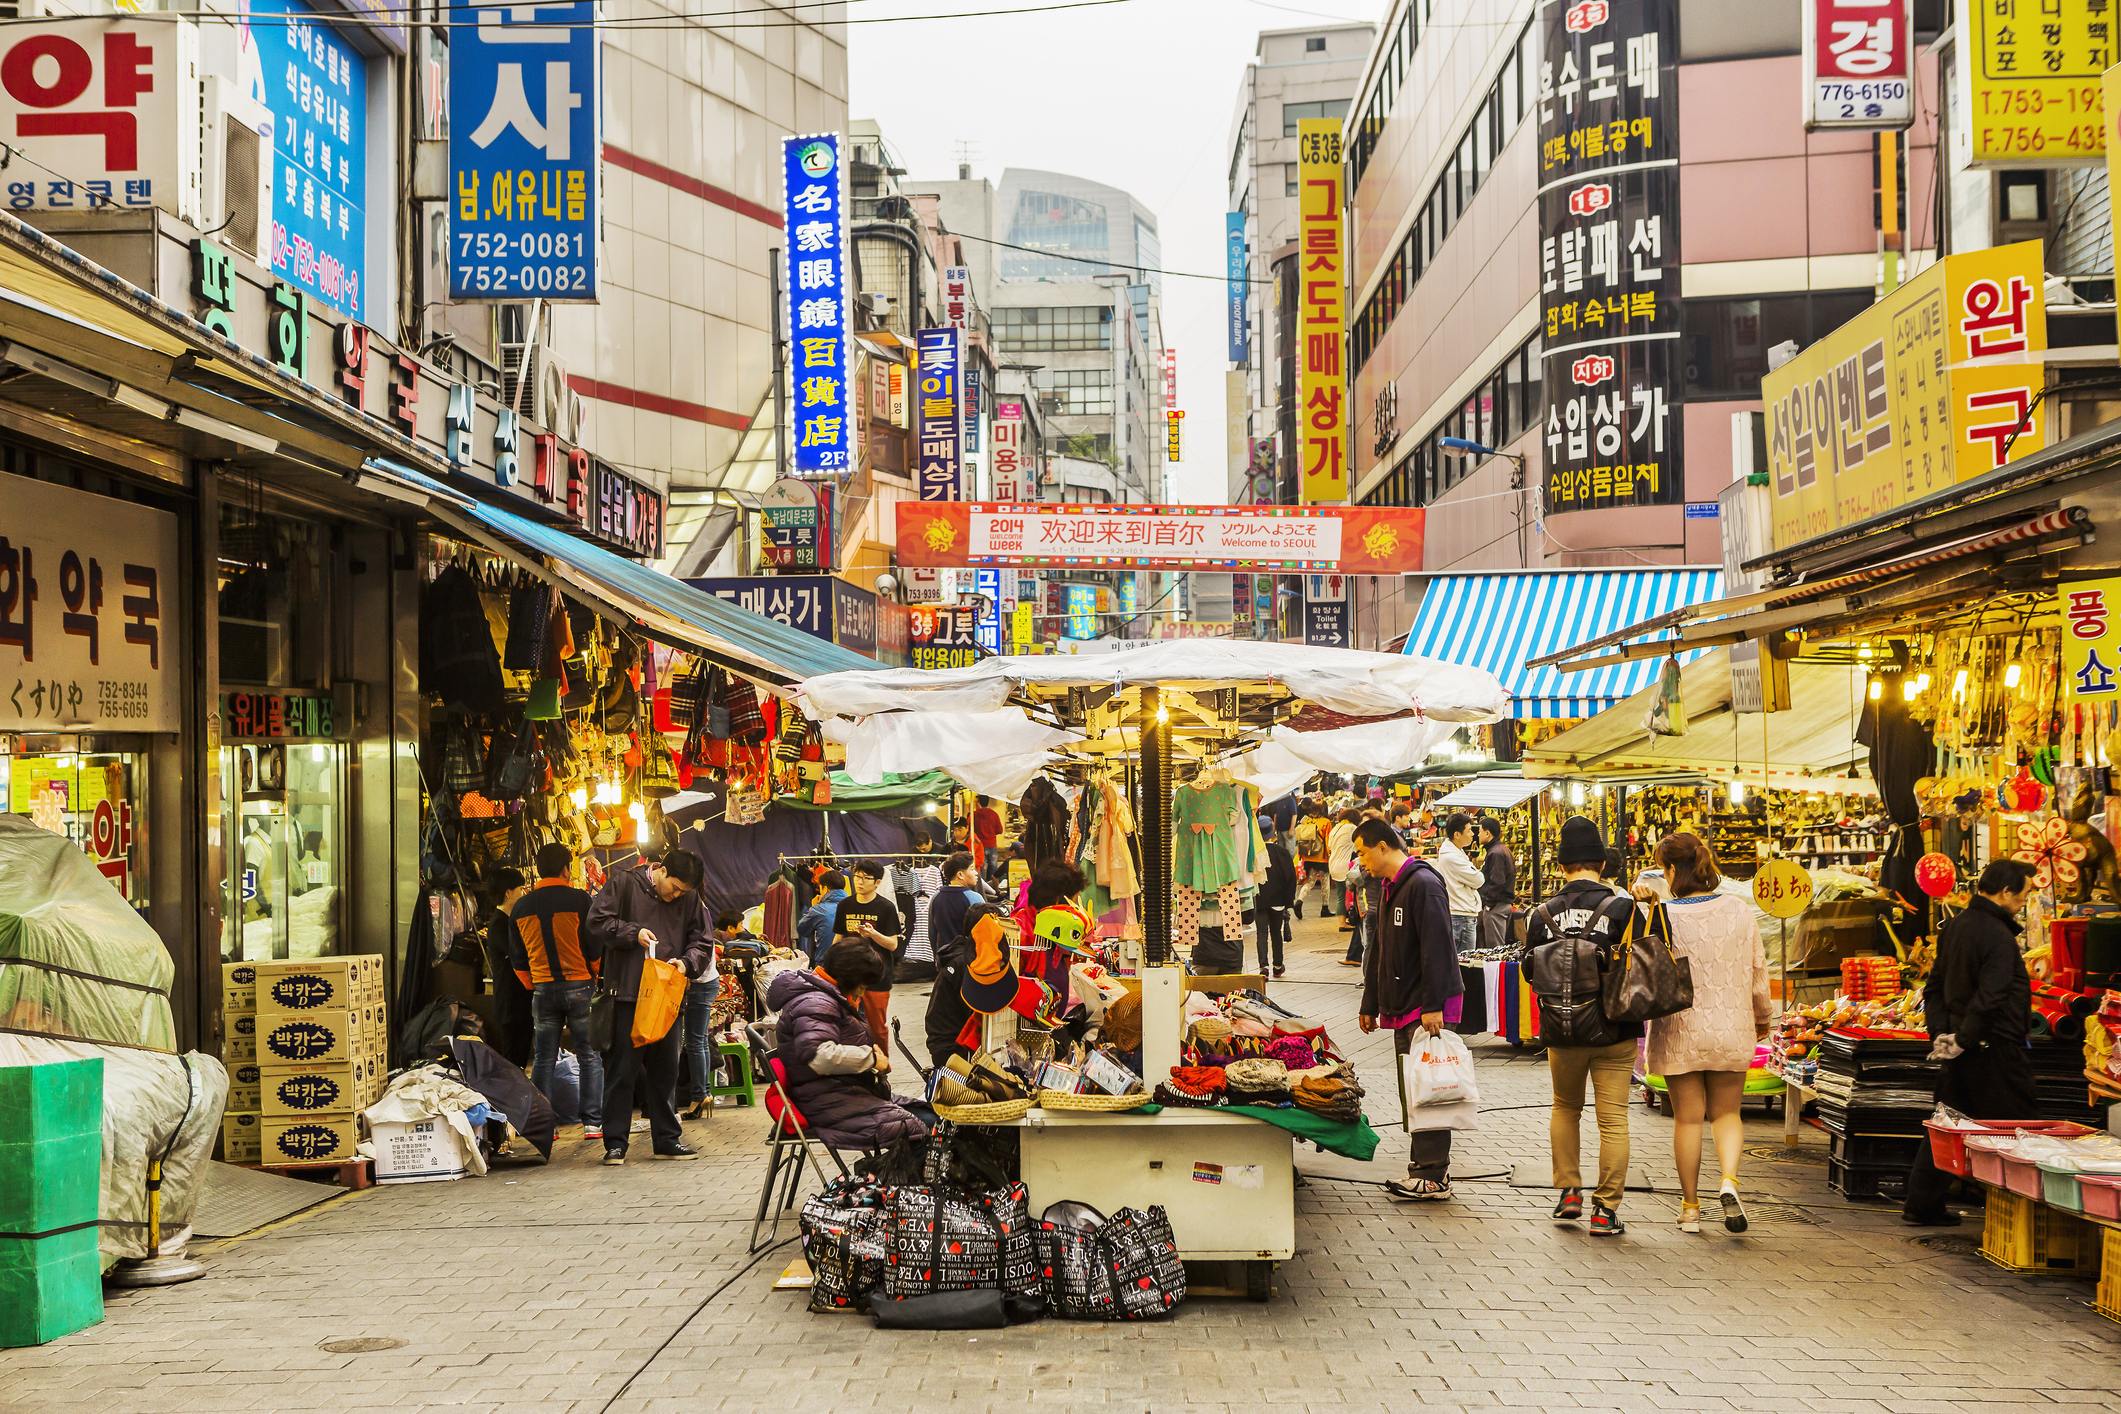 Bustling street market with various stalls and signage, no individuals identified